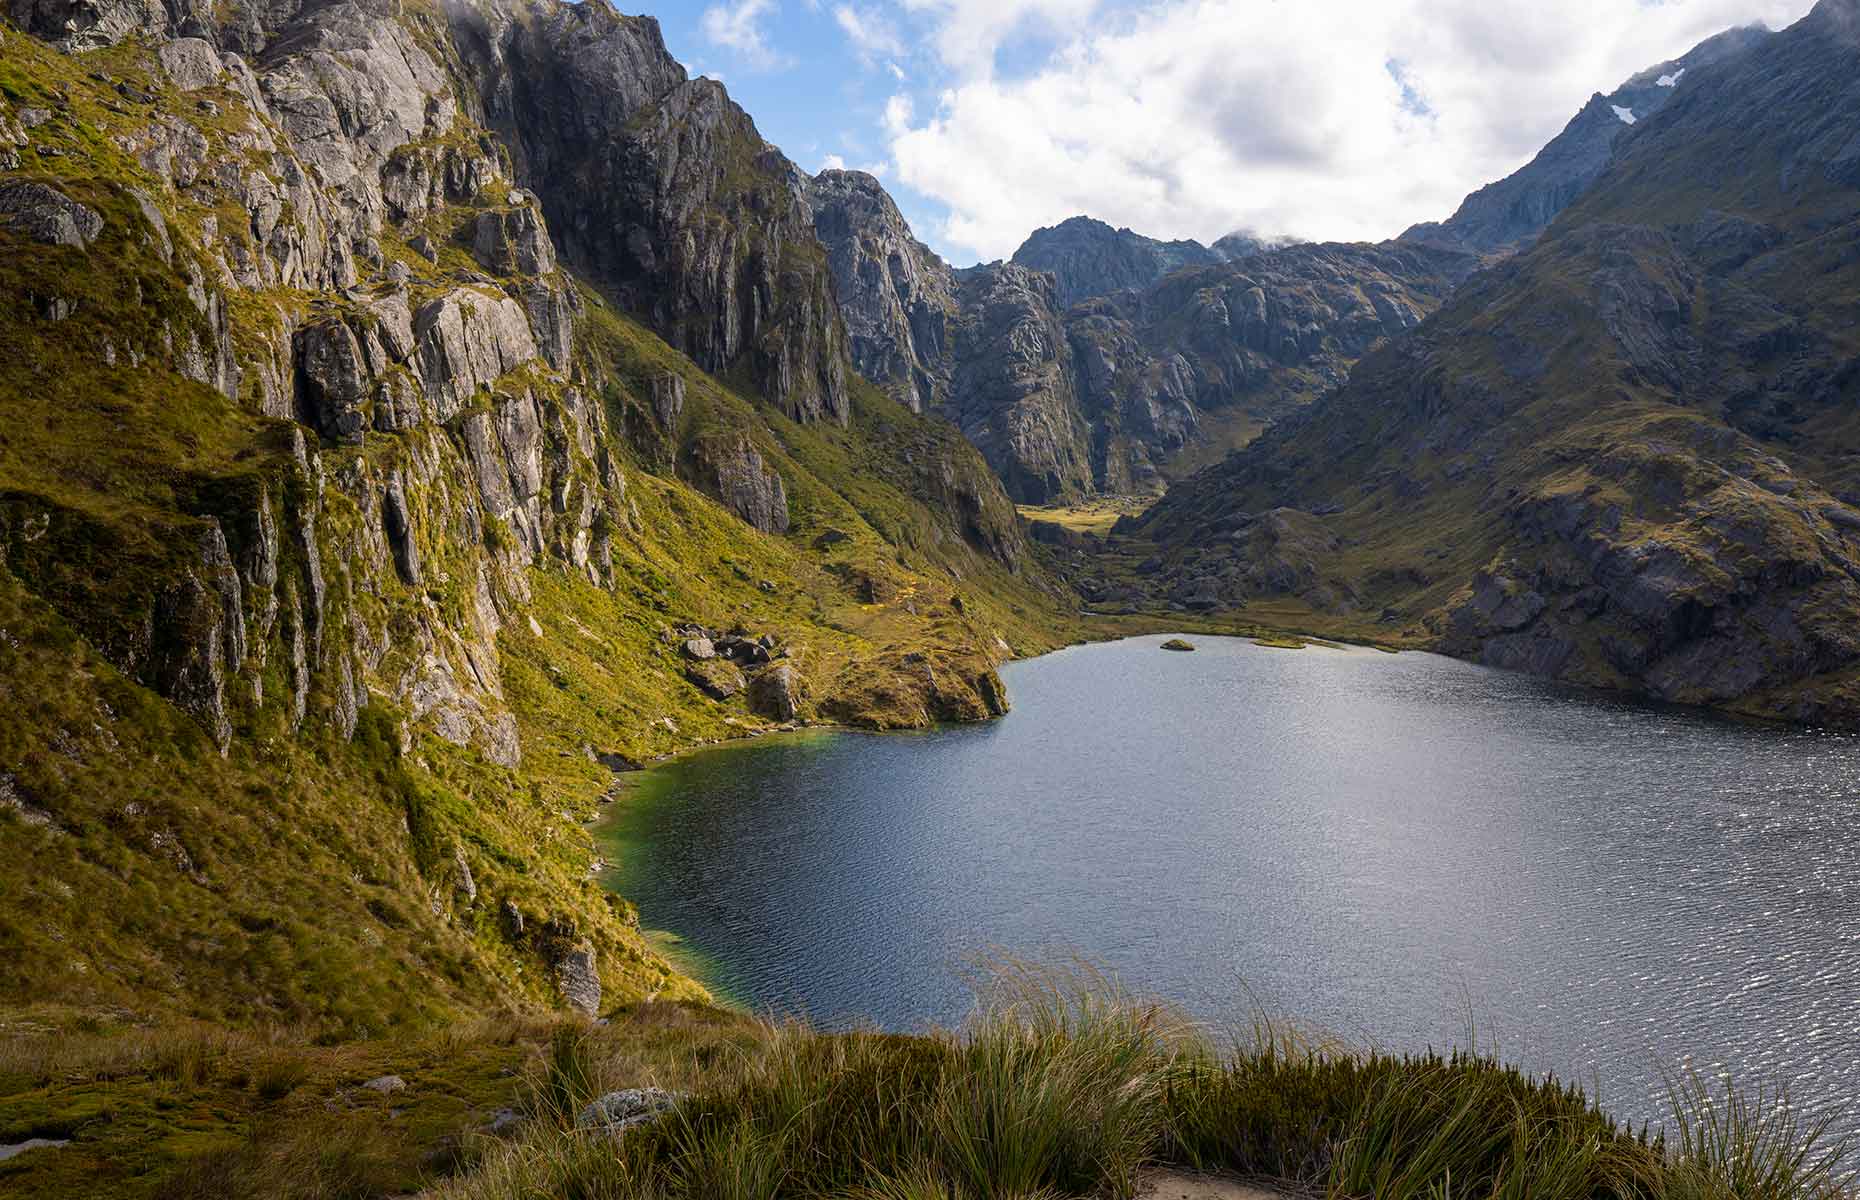 Lake Harris in Routeburn Track, South Island, New Zealand (Image credit: Tourism New Zealand)